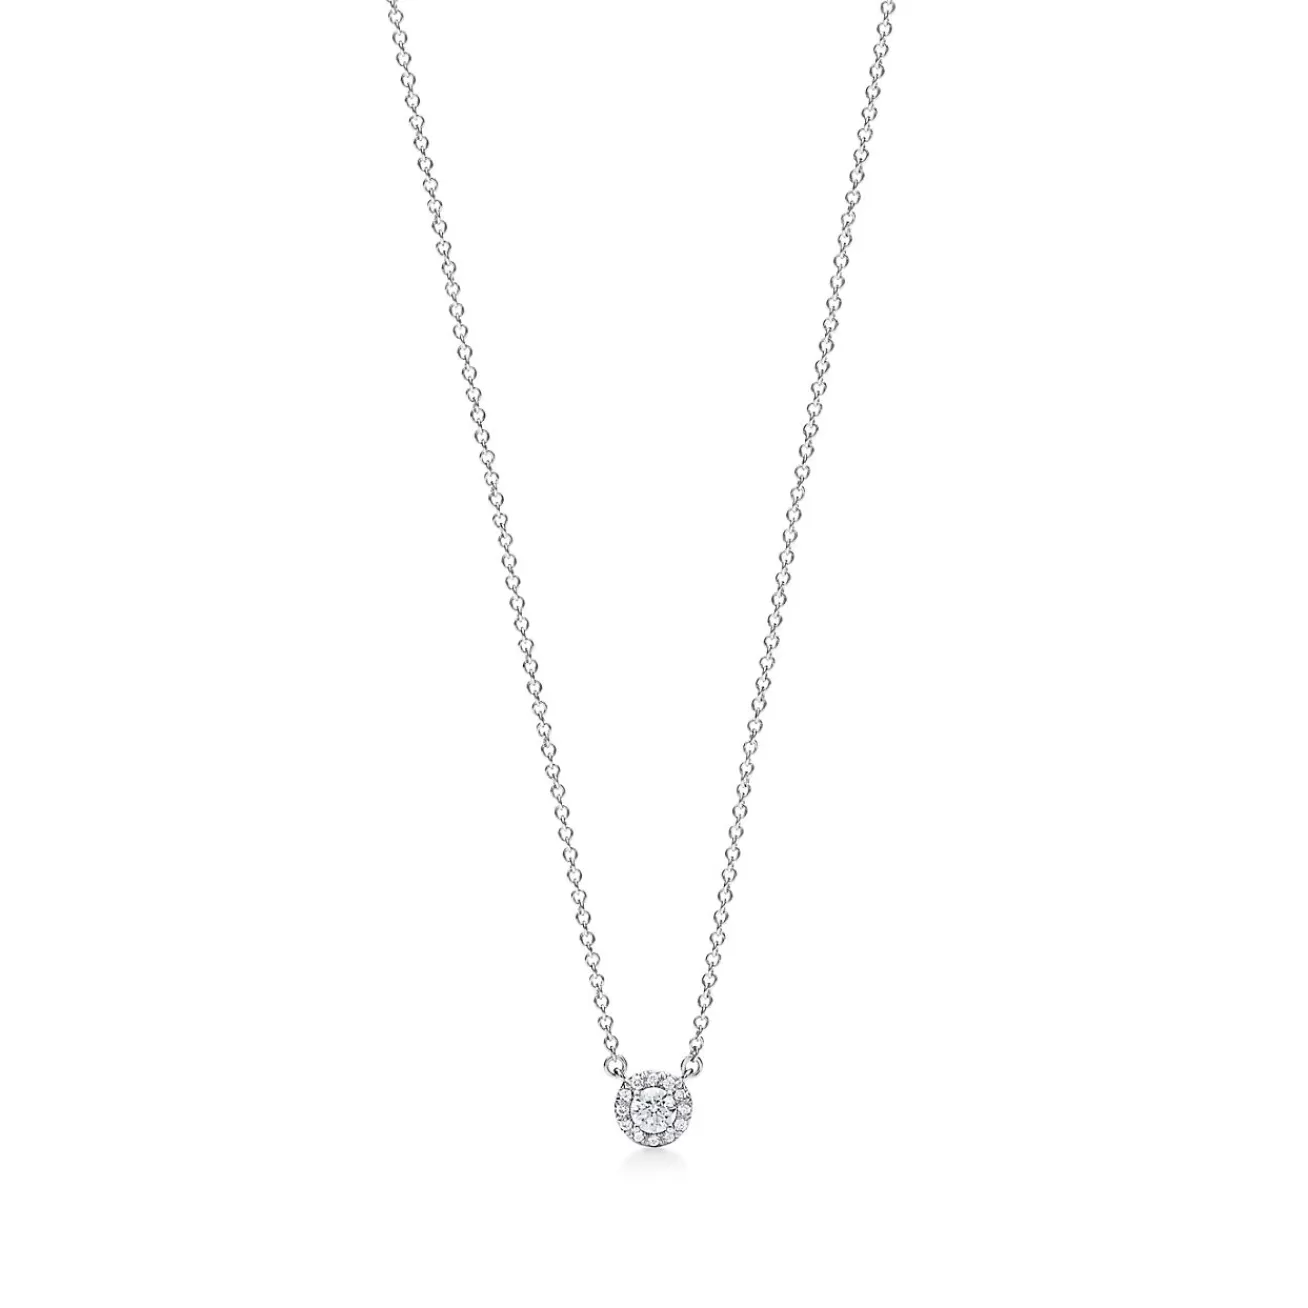 Tiffany & Co. Tiffany Soleste® pendant in platinum with diamonds. | ^ Necklaces & Pendants | Gifts for Her